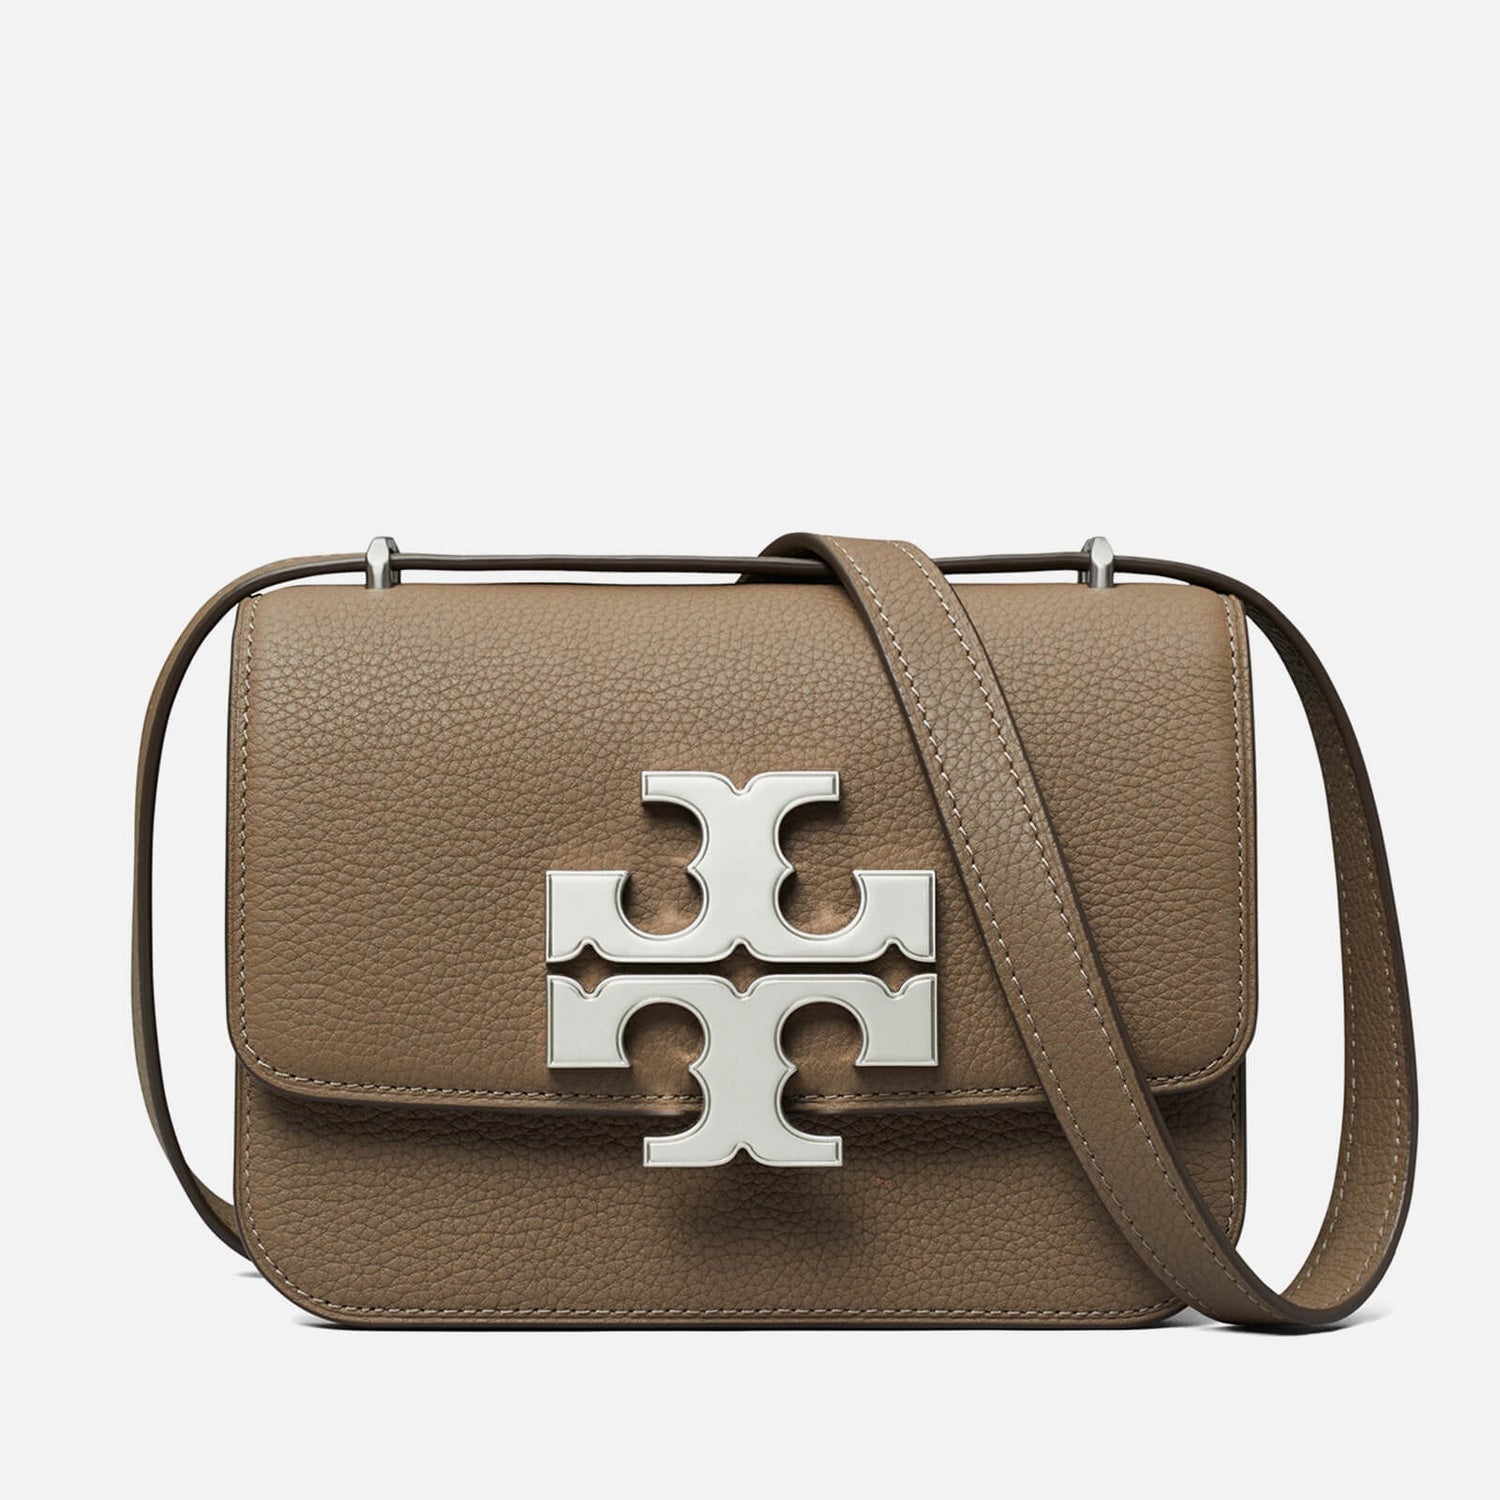 Tory Burch Eleanor Small Pebbled Leather Shoulder Bag